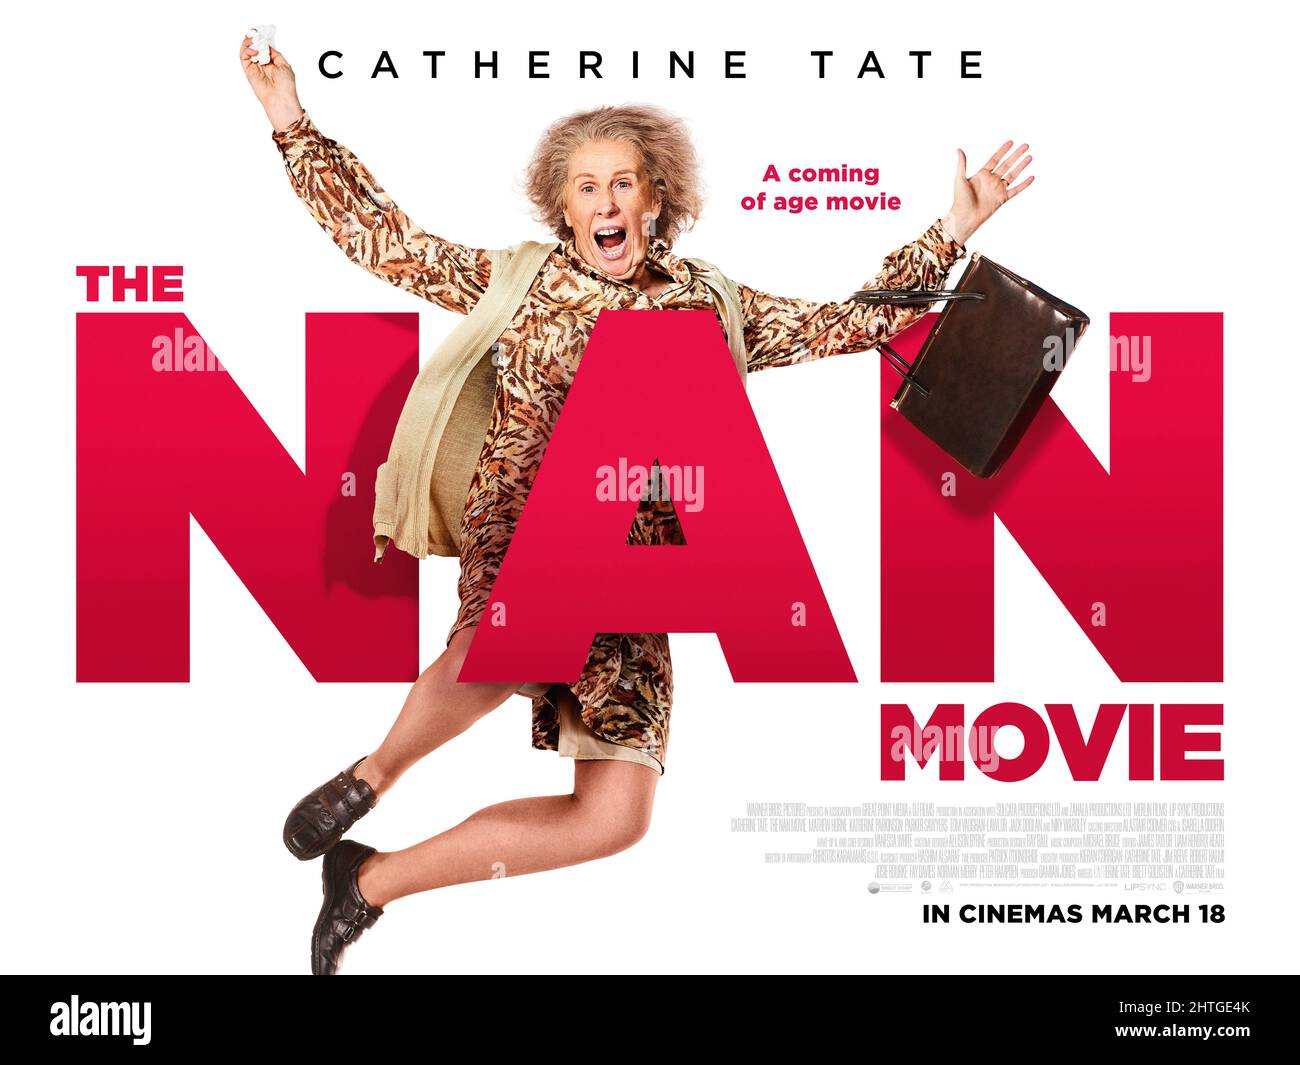 RELEASE DATE: March 18, 2022. TITLE: The Nan Movie. STUDIO: Great Point Media. DIRECTOR: Josie Rourke. PLOT: Catherine Tate's iconic character Nan hits the big screen as she goes on a wild road trip from London to Ireland with her grandson Jamie (Mathew Horne) to make amends with her estranged sister Nell (Katherine Parkinson). STARRING: CATHERINE TATE as Nan. (Credit Image: © Great Point Media/Entertainment Pictures)Catherine Tate Stock Photo